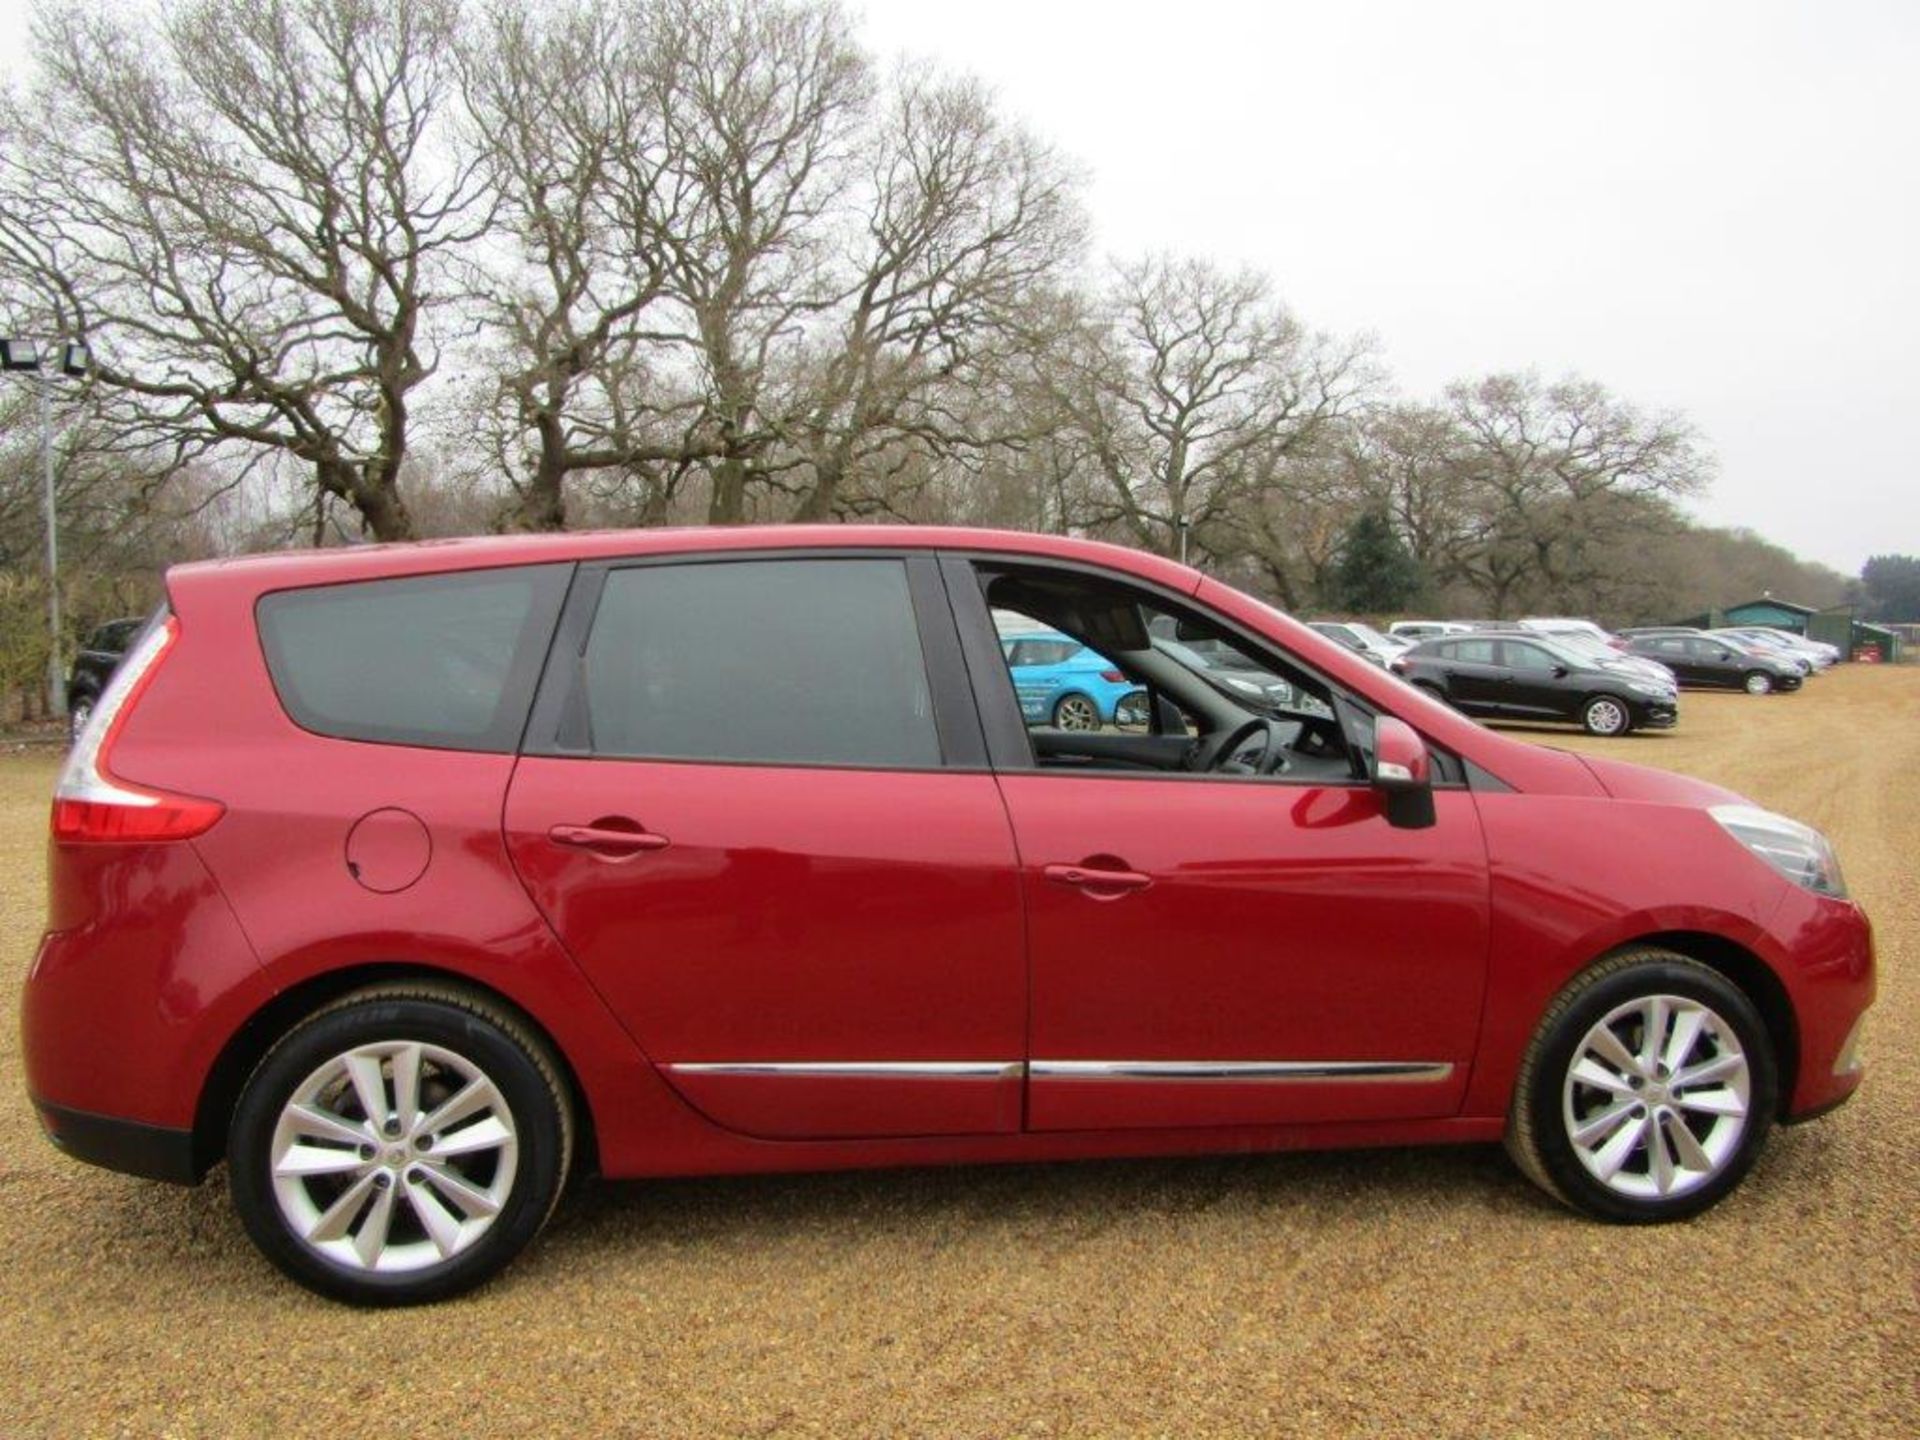 62 12 Renault GScenic D-Quettluxe - Image 13 of 23